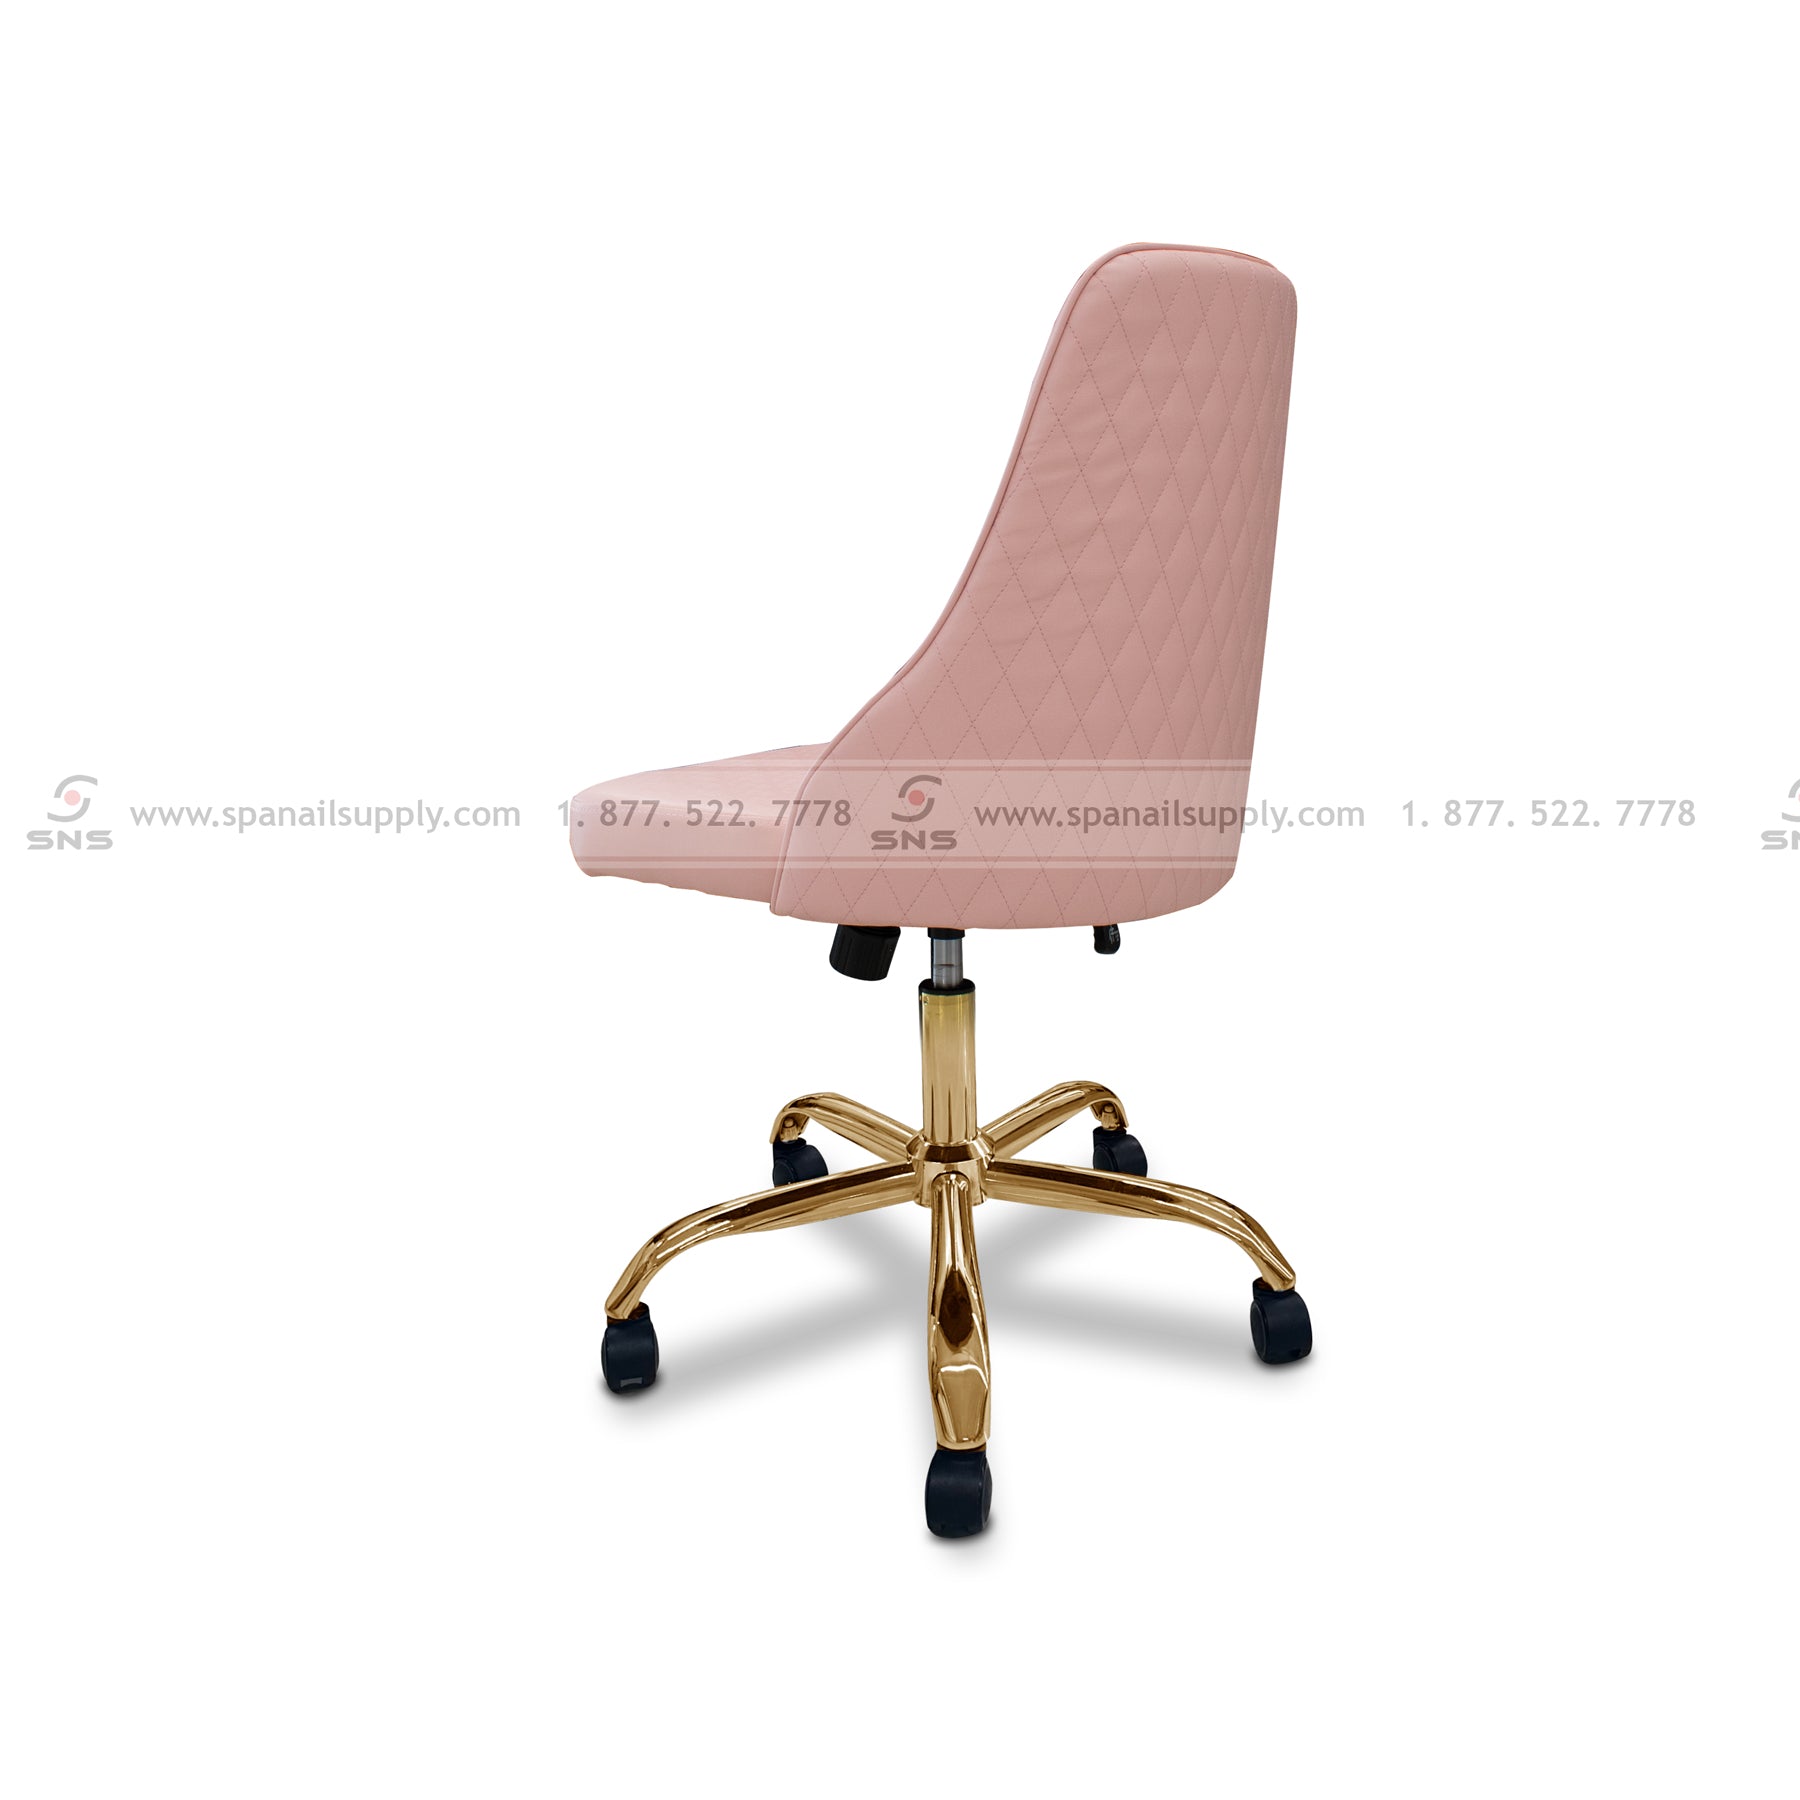 Erika Customer Chair Pink Italy Gold Base  - Inventory